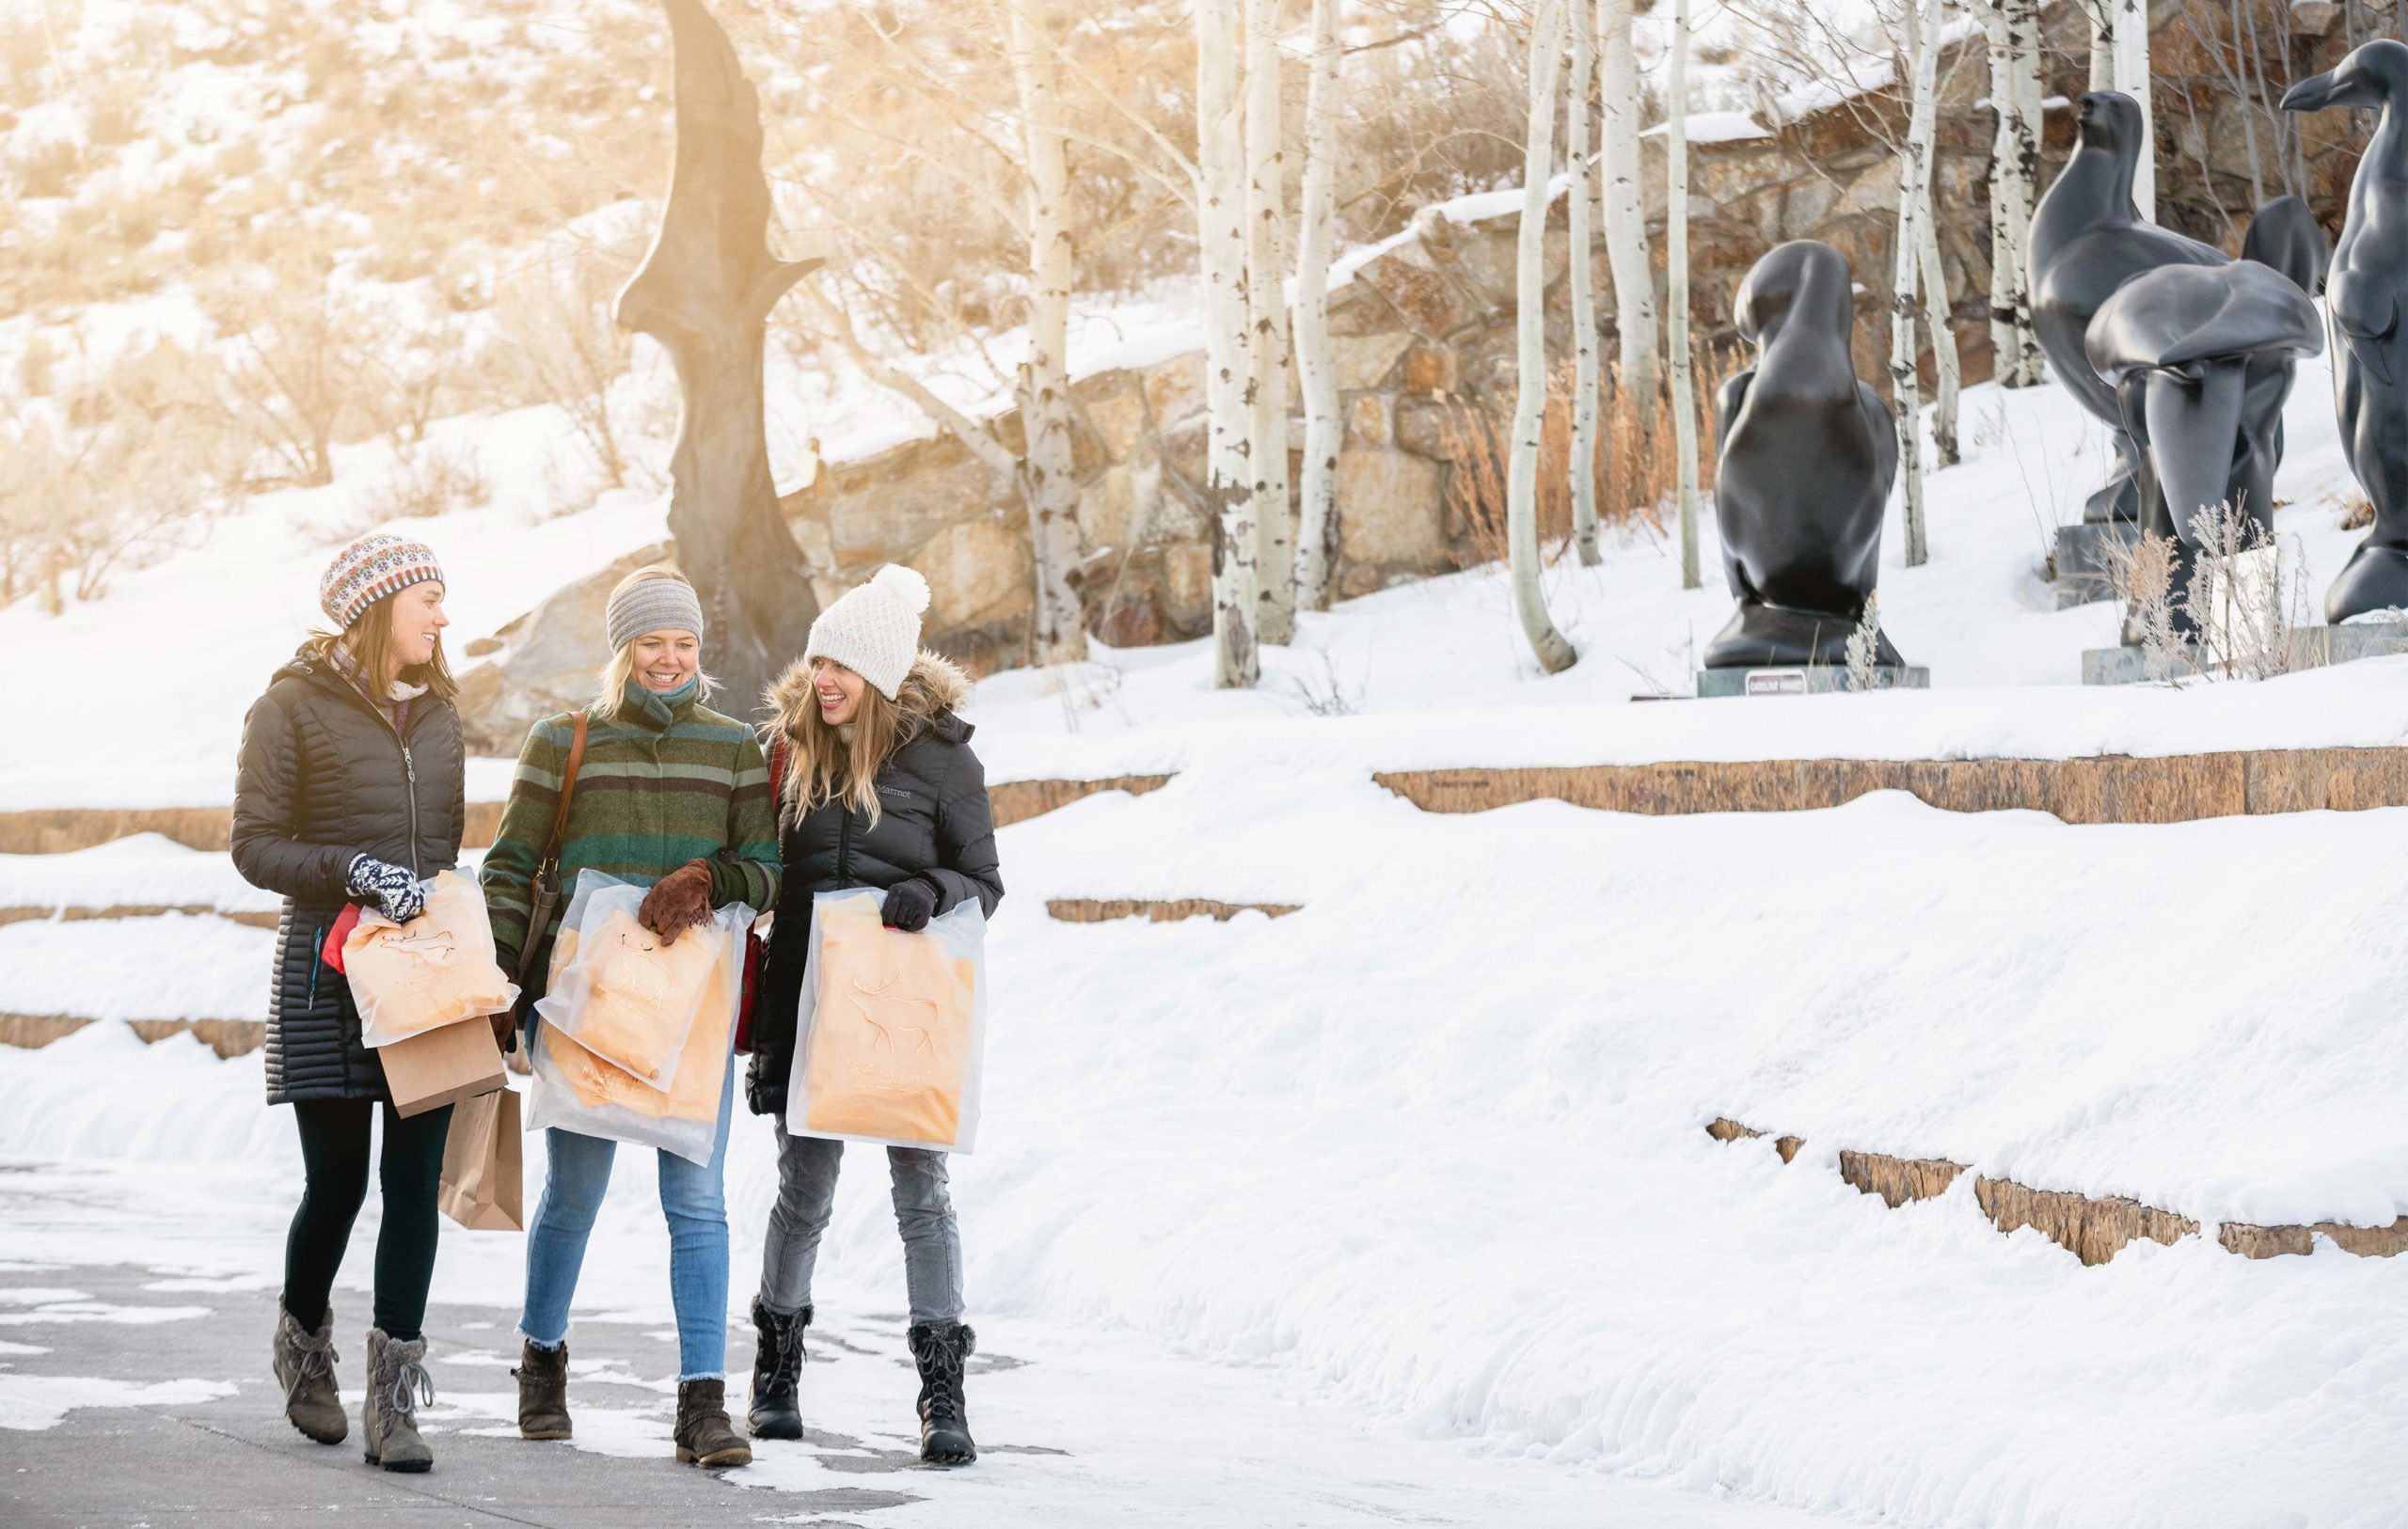 New-Thought-National-Museum-of-Wildlife-Art-Ad-Photography-Three-Women-Shopping-Sculpture-Winter-fullscreen